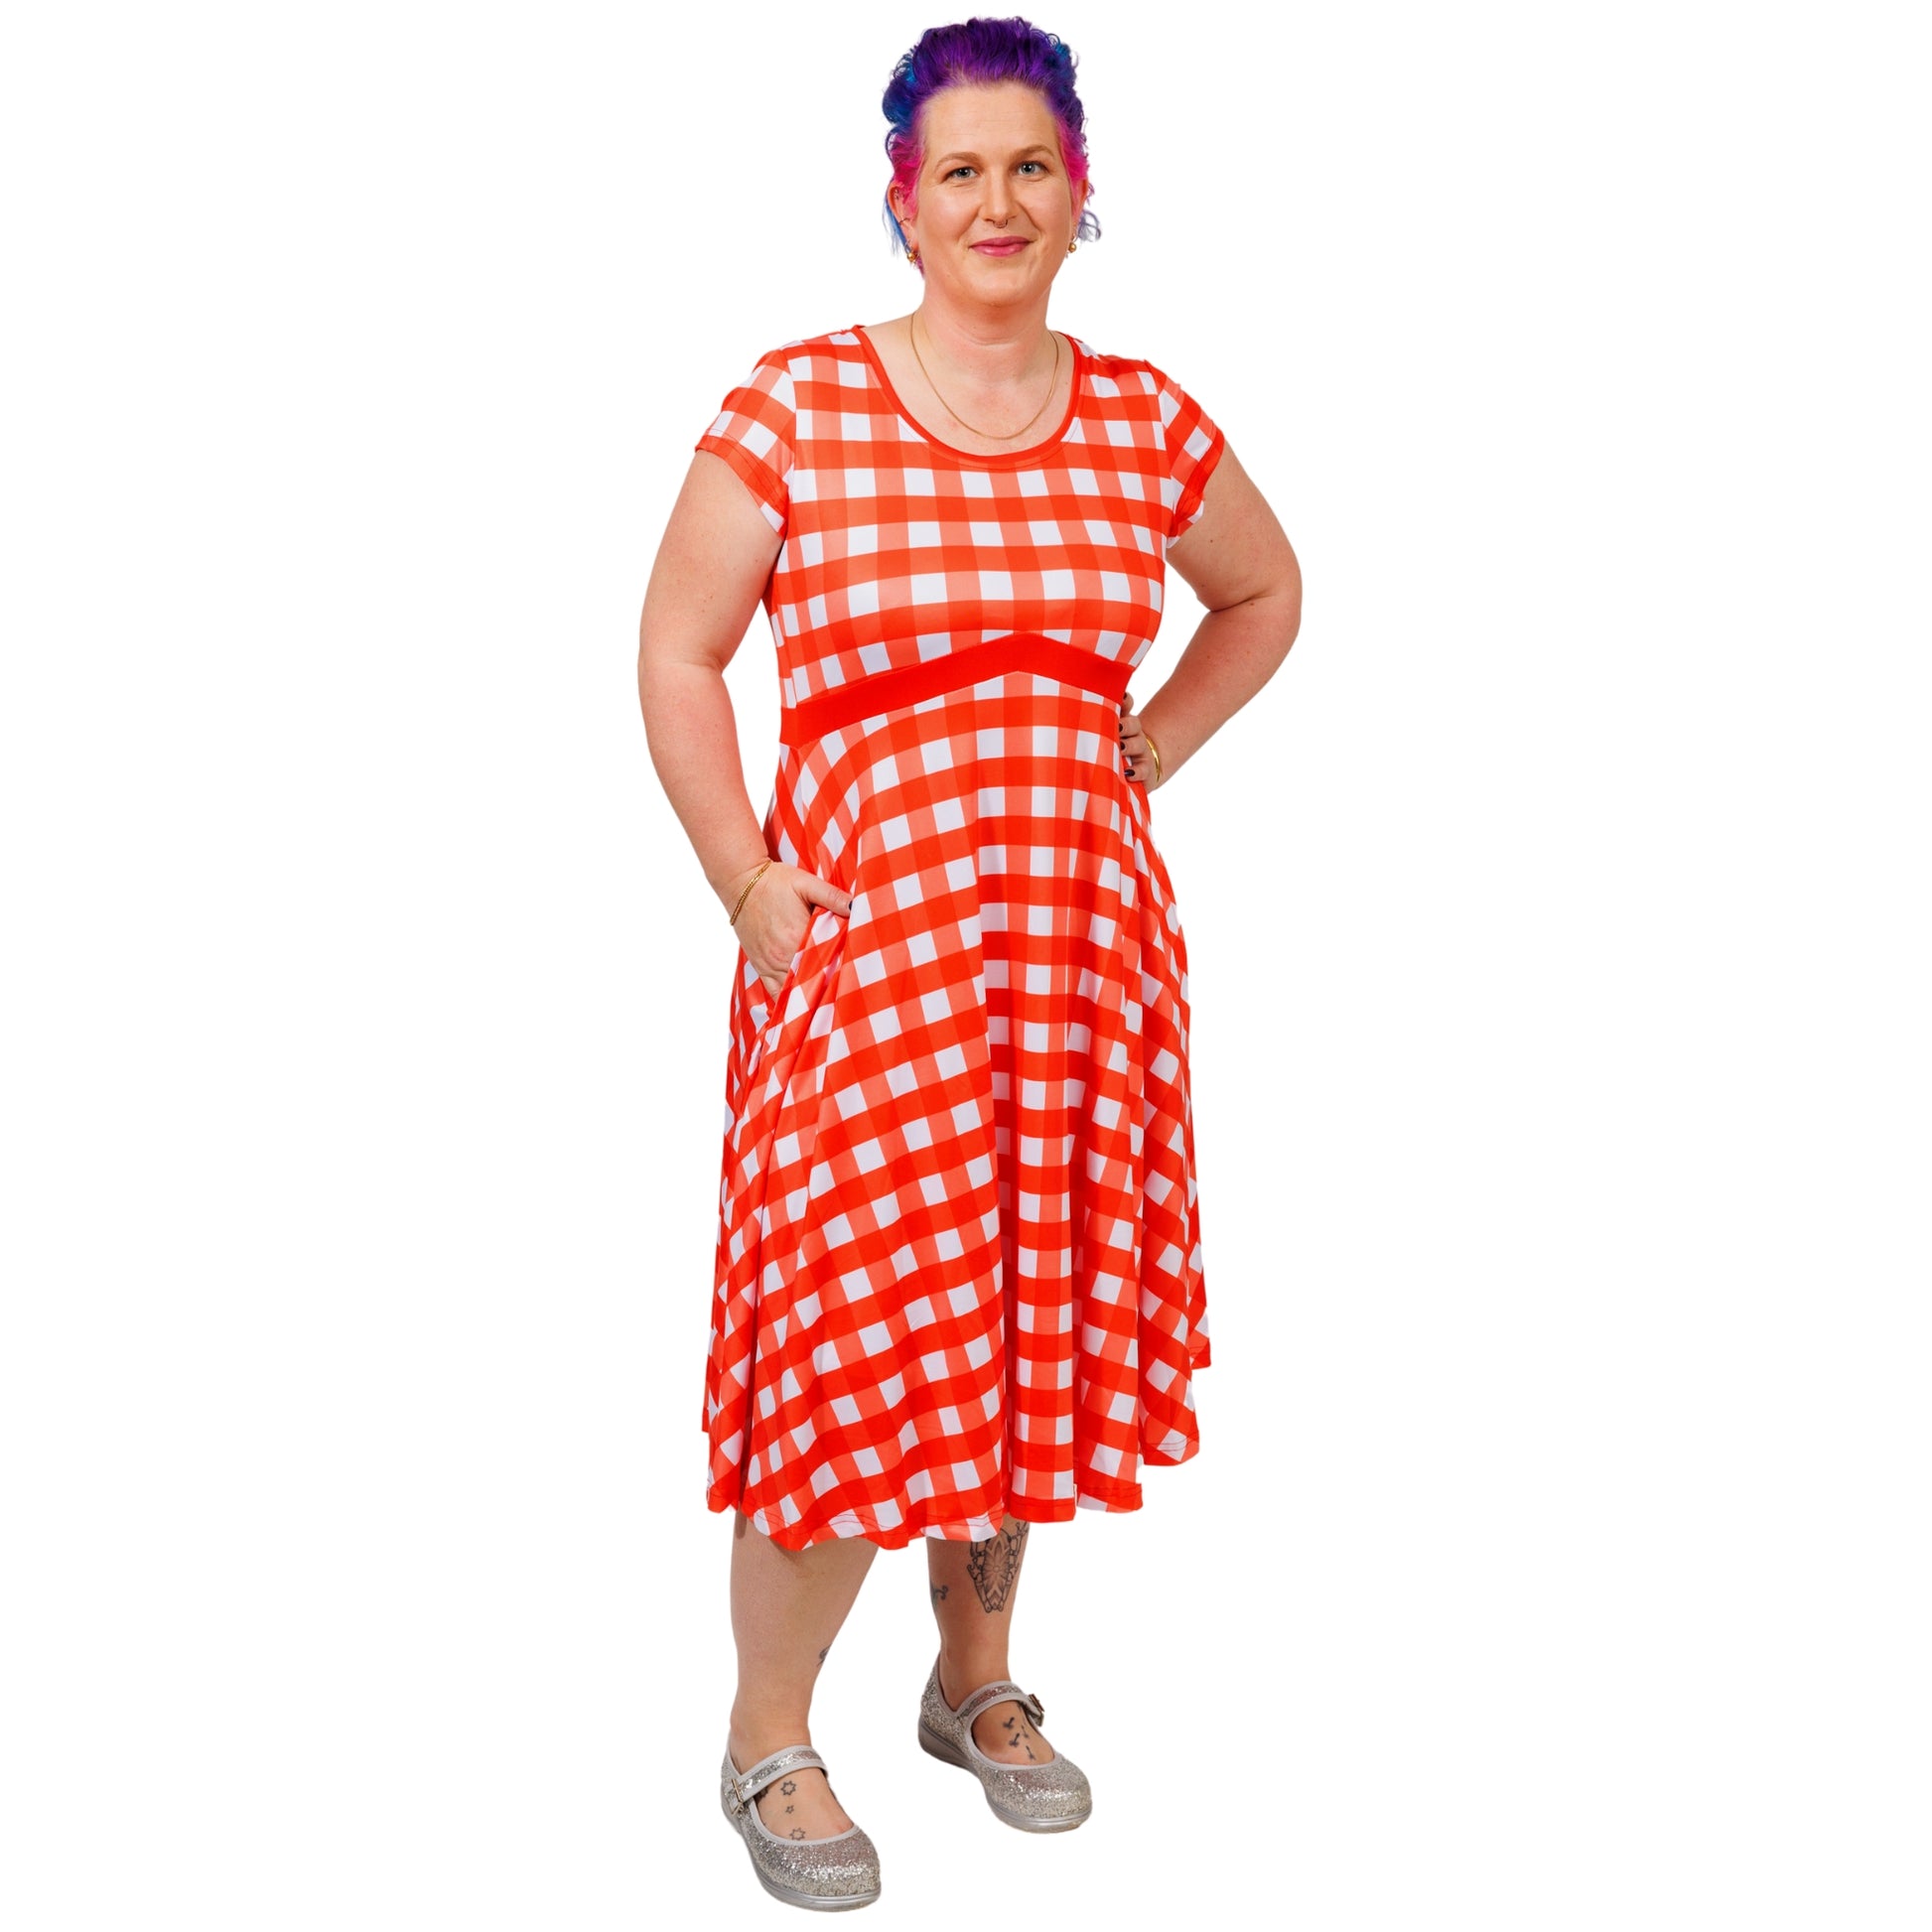 Red Gingham Tea Dress by RainbowsAndFairies.com (Check - Picnic - Dress With Pockets - Rockabilly  - Vintage Inspired) - SKU: CL_TEADR_GINGH_RED - Pic 02